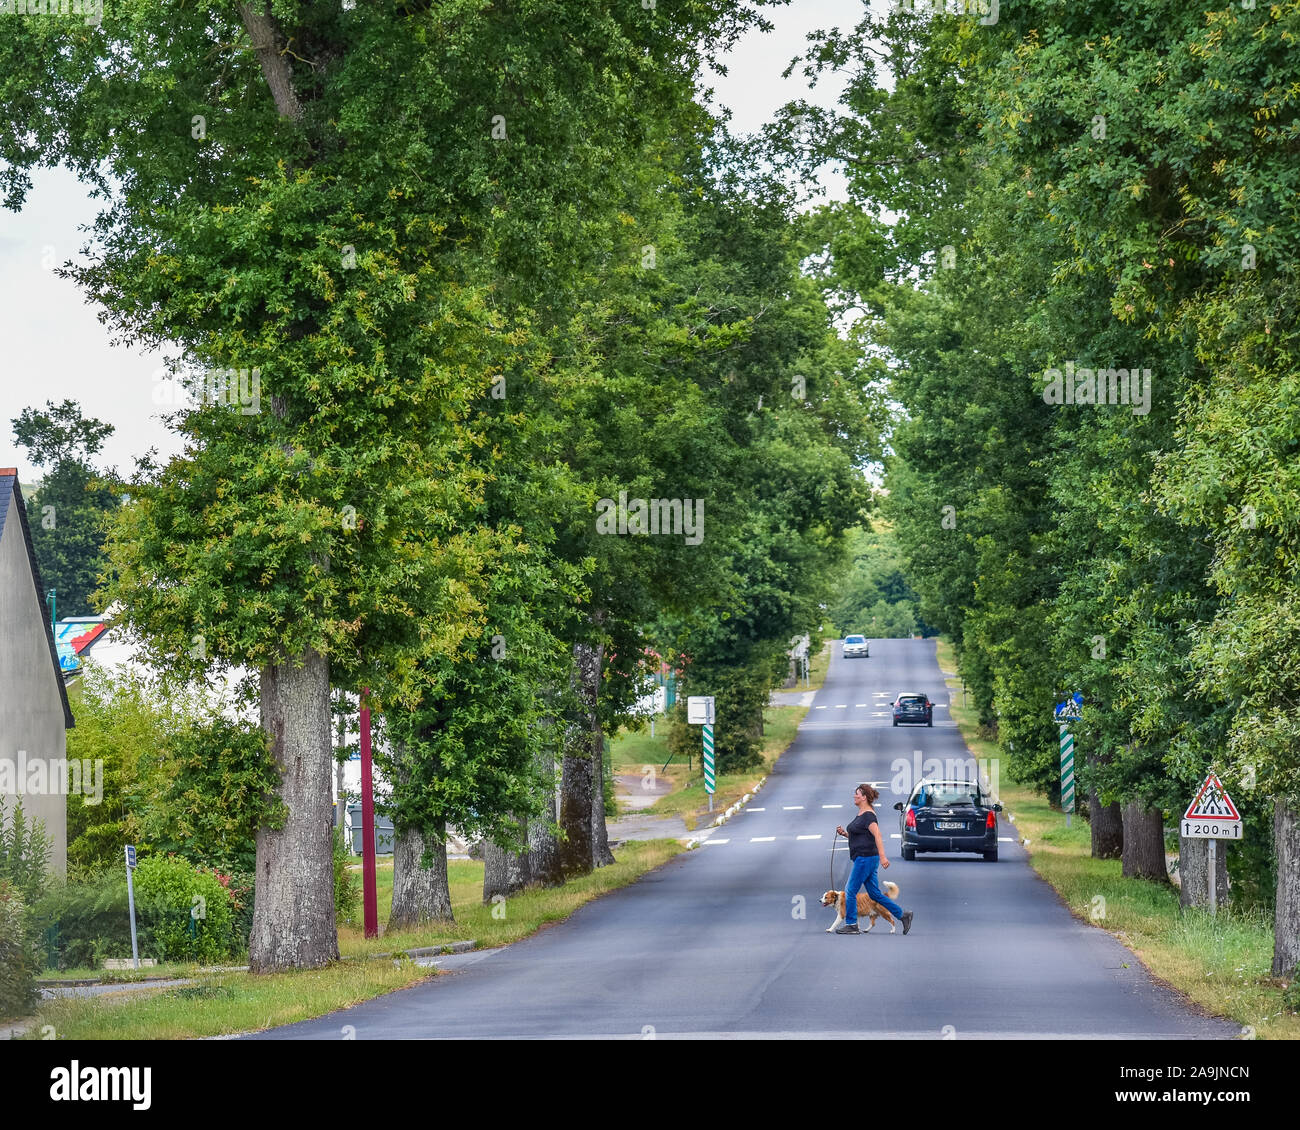 Campénéac, FRANCE - JULY 2, 2017: A woman walking her dog, crosses a road through trees and transited by cars, in the afternoon. Stock Photo